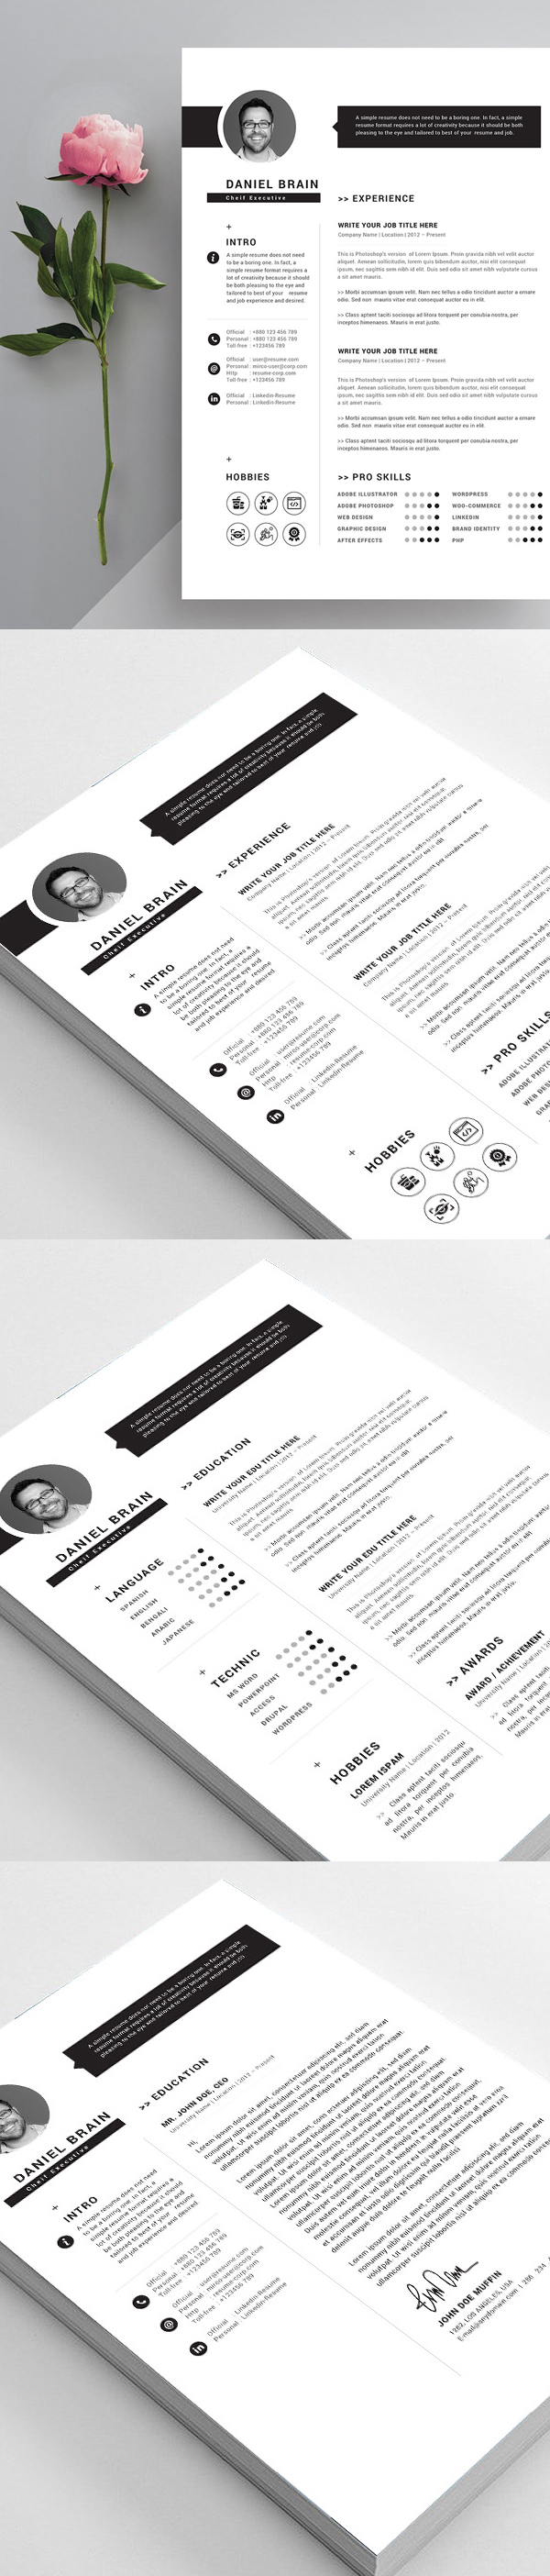 Free 2 Pages CV/Resume Template